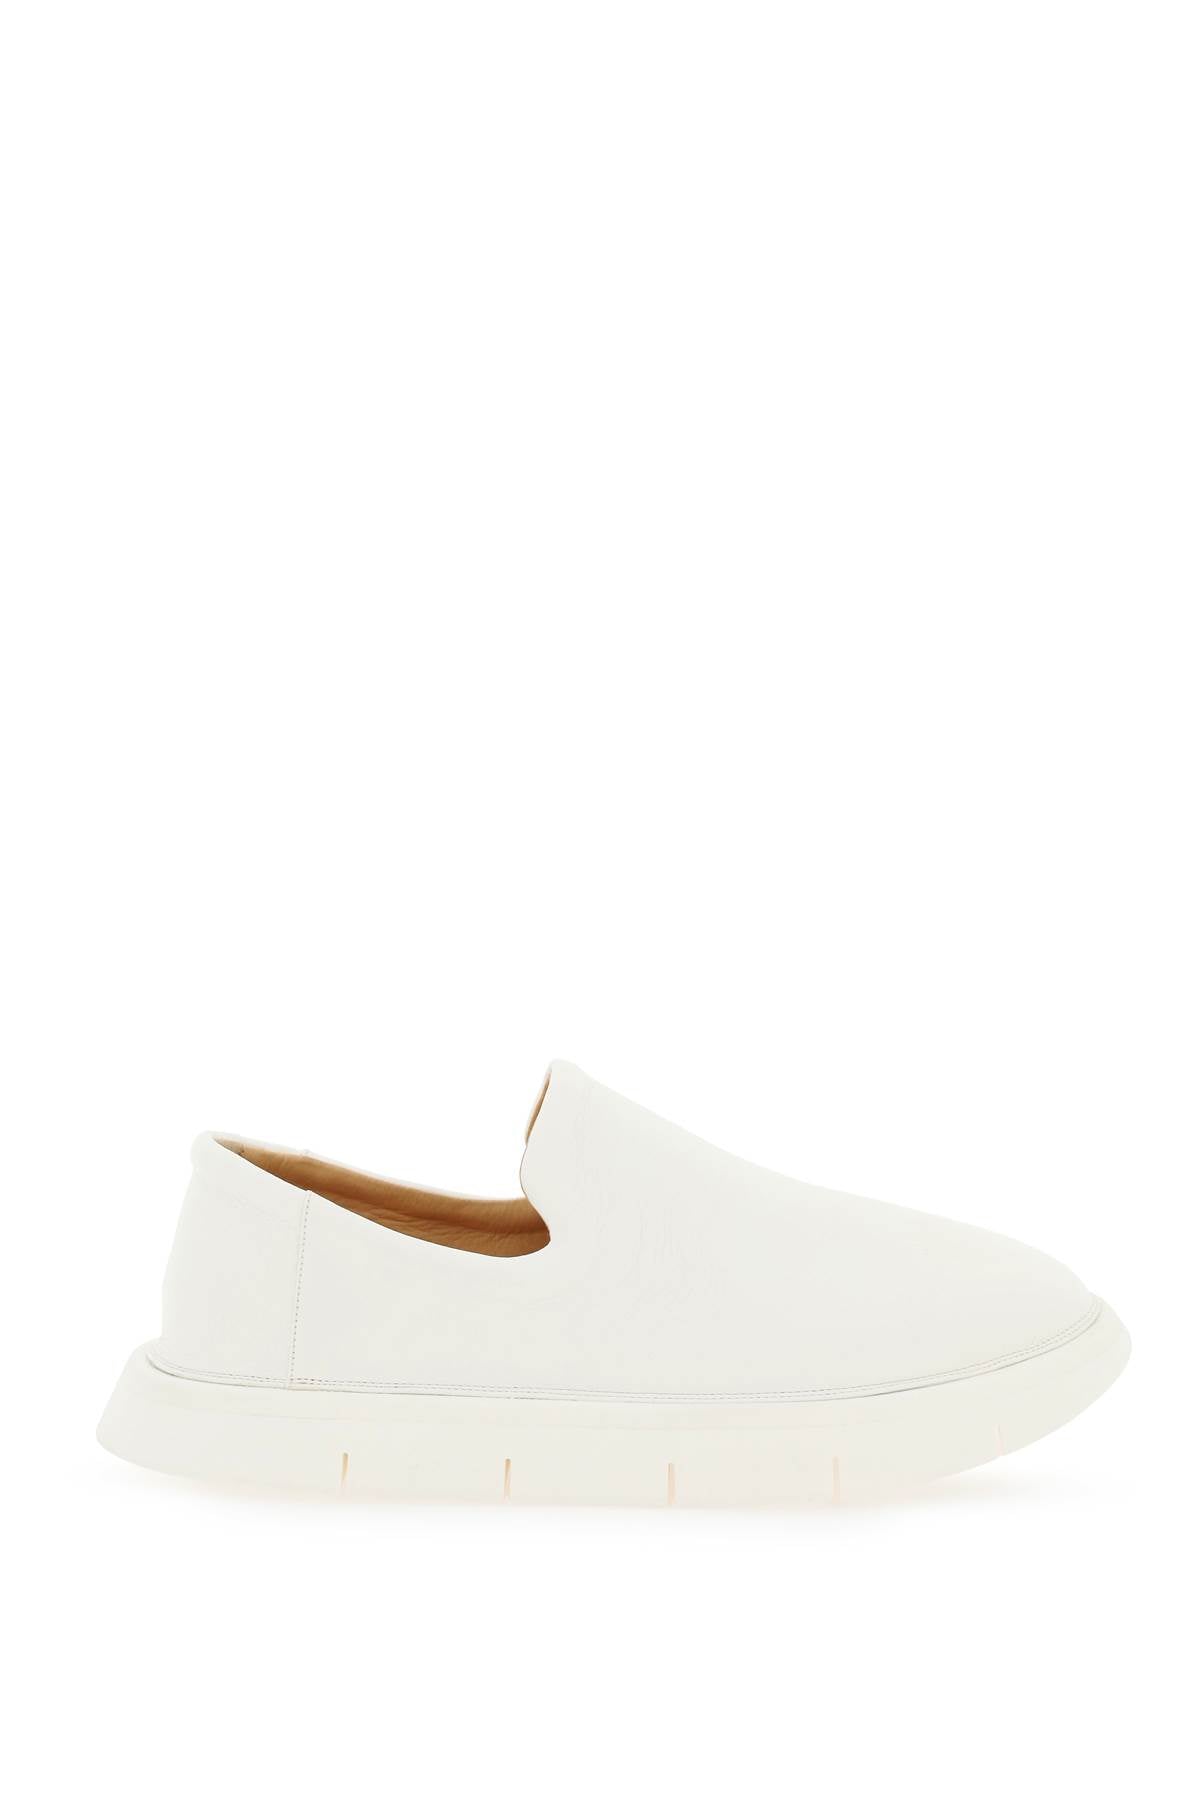 Marsell 'intagliata' grained leather slip-on shoes-0